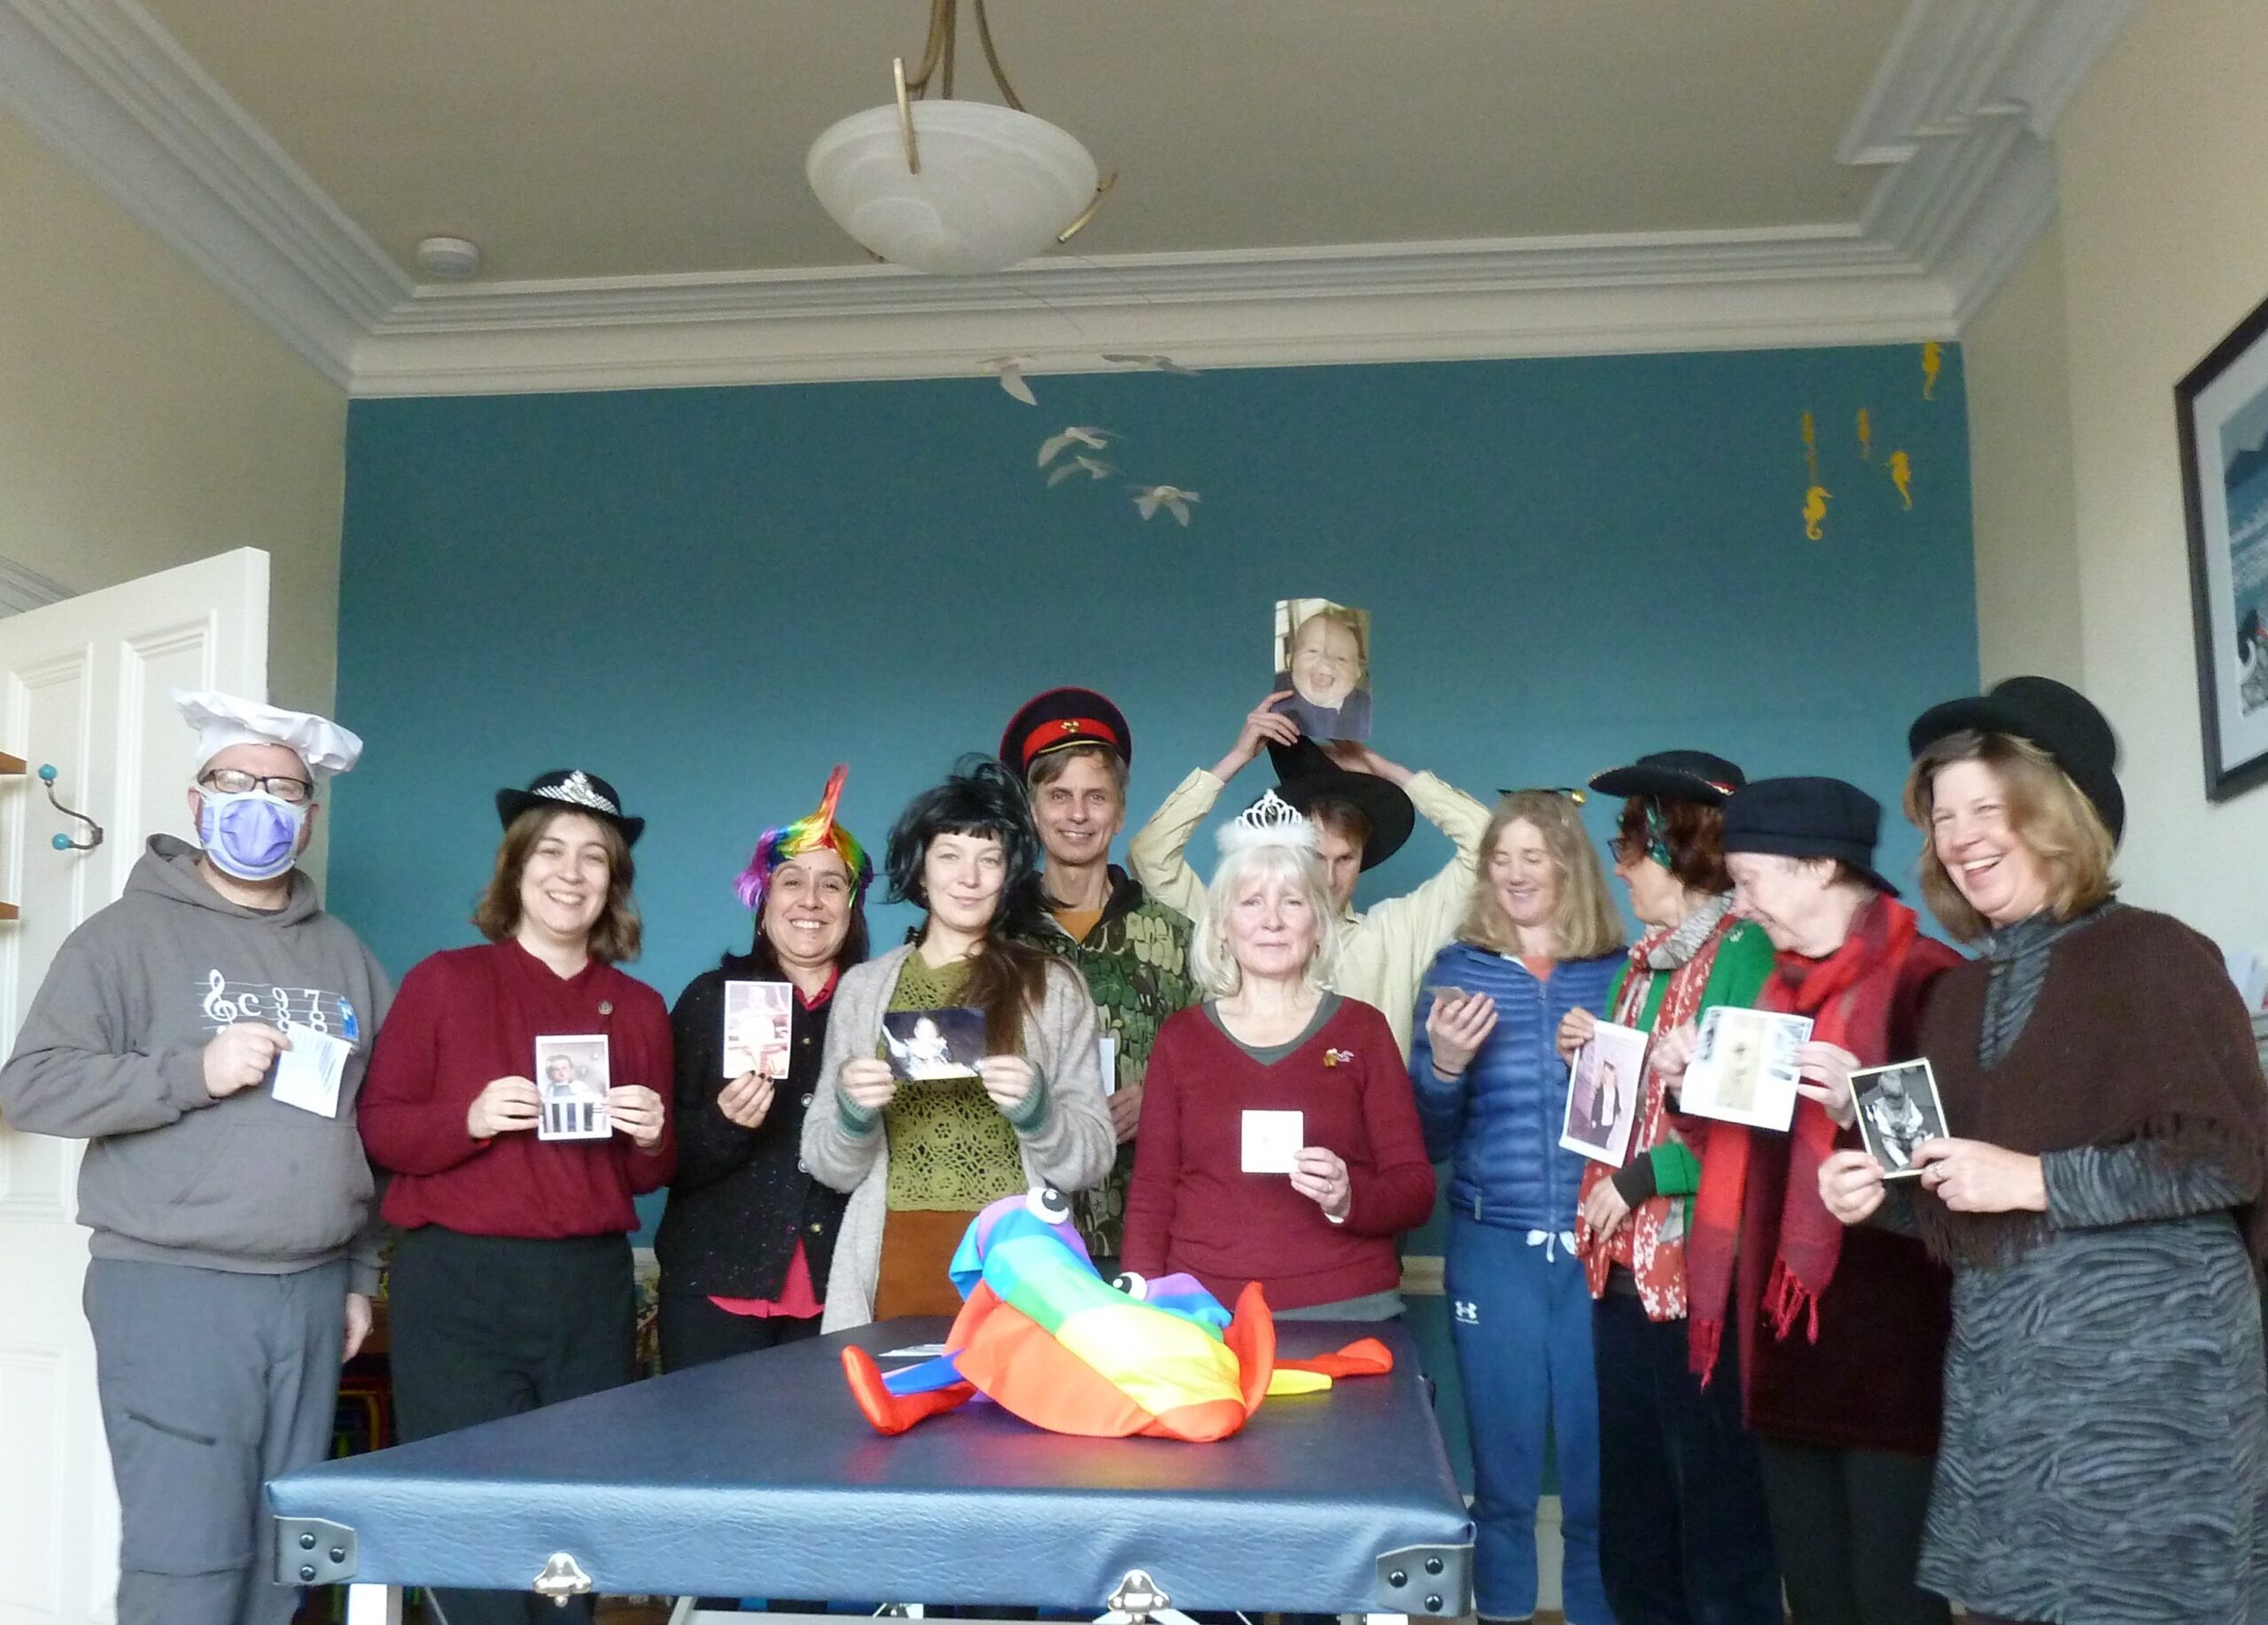 The EATS team at our end of term Christmas party, all wearing silly hats and holding up baby photos of themselves